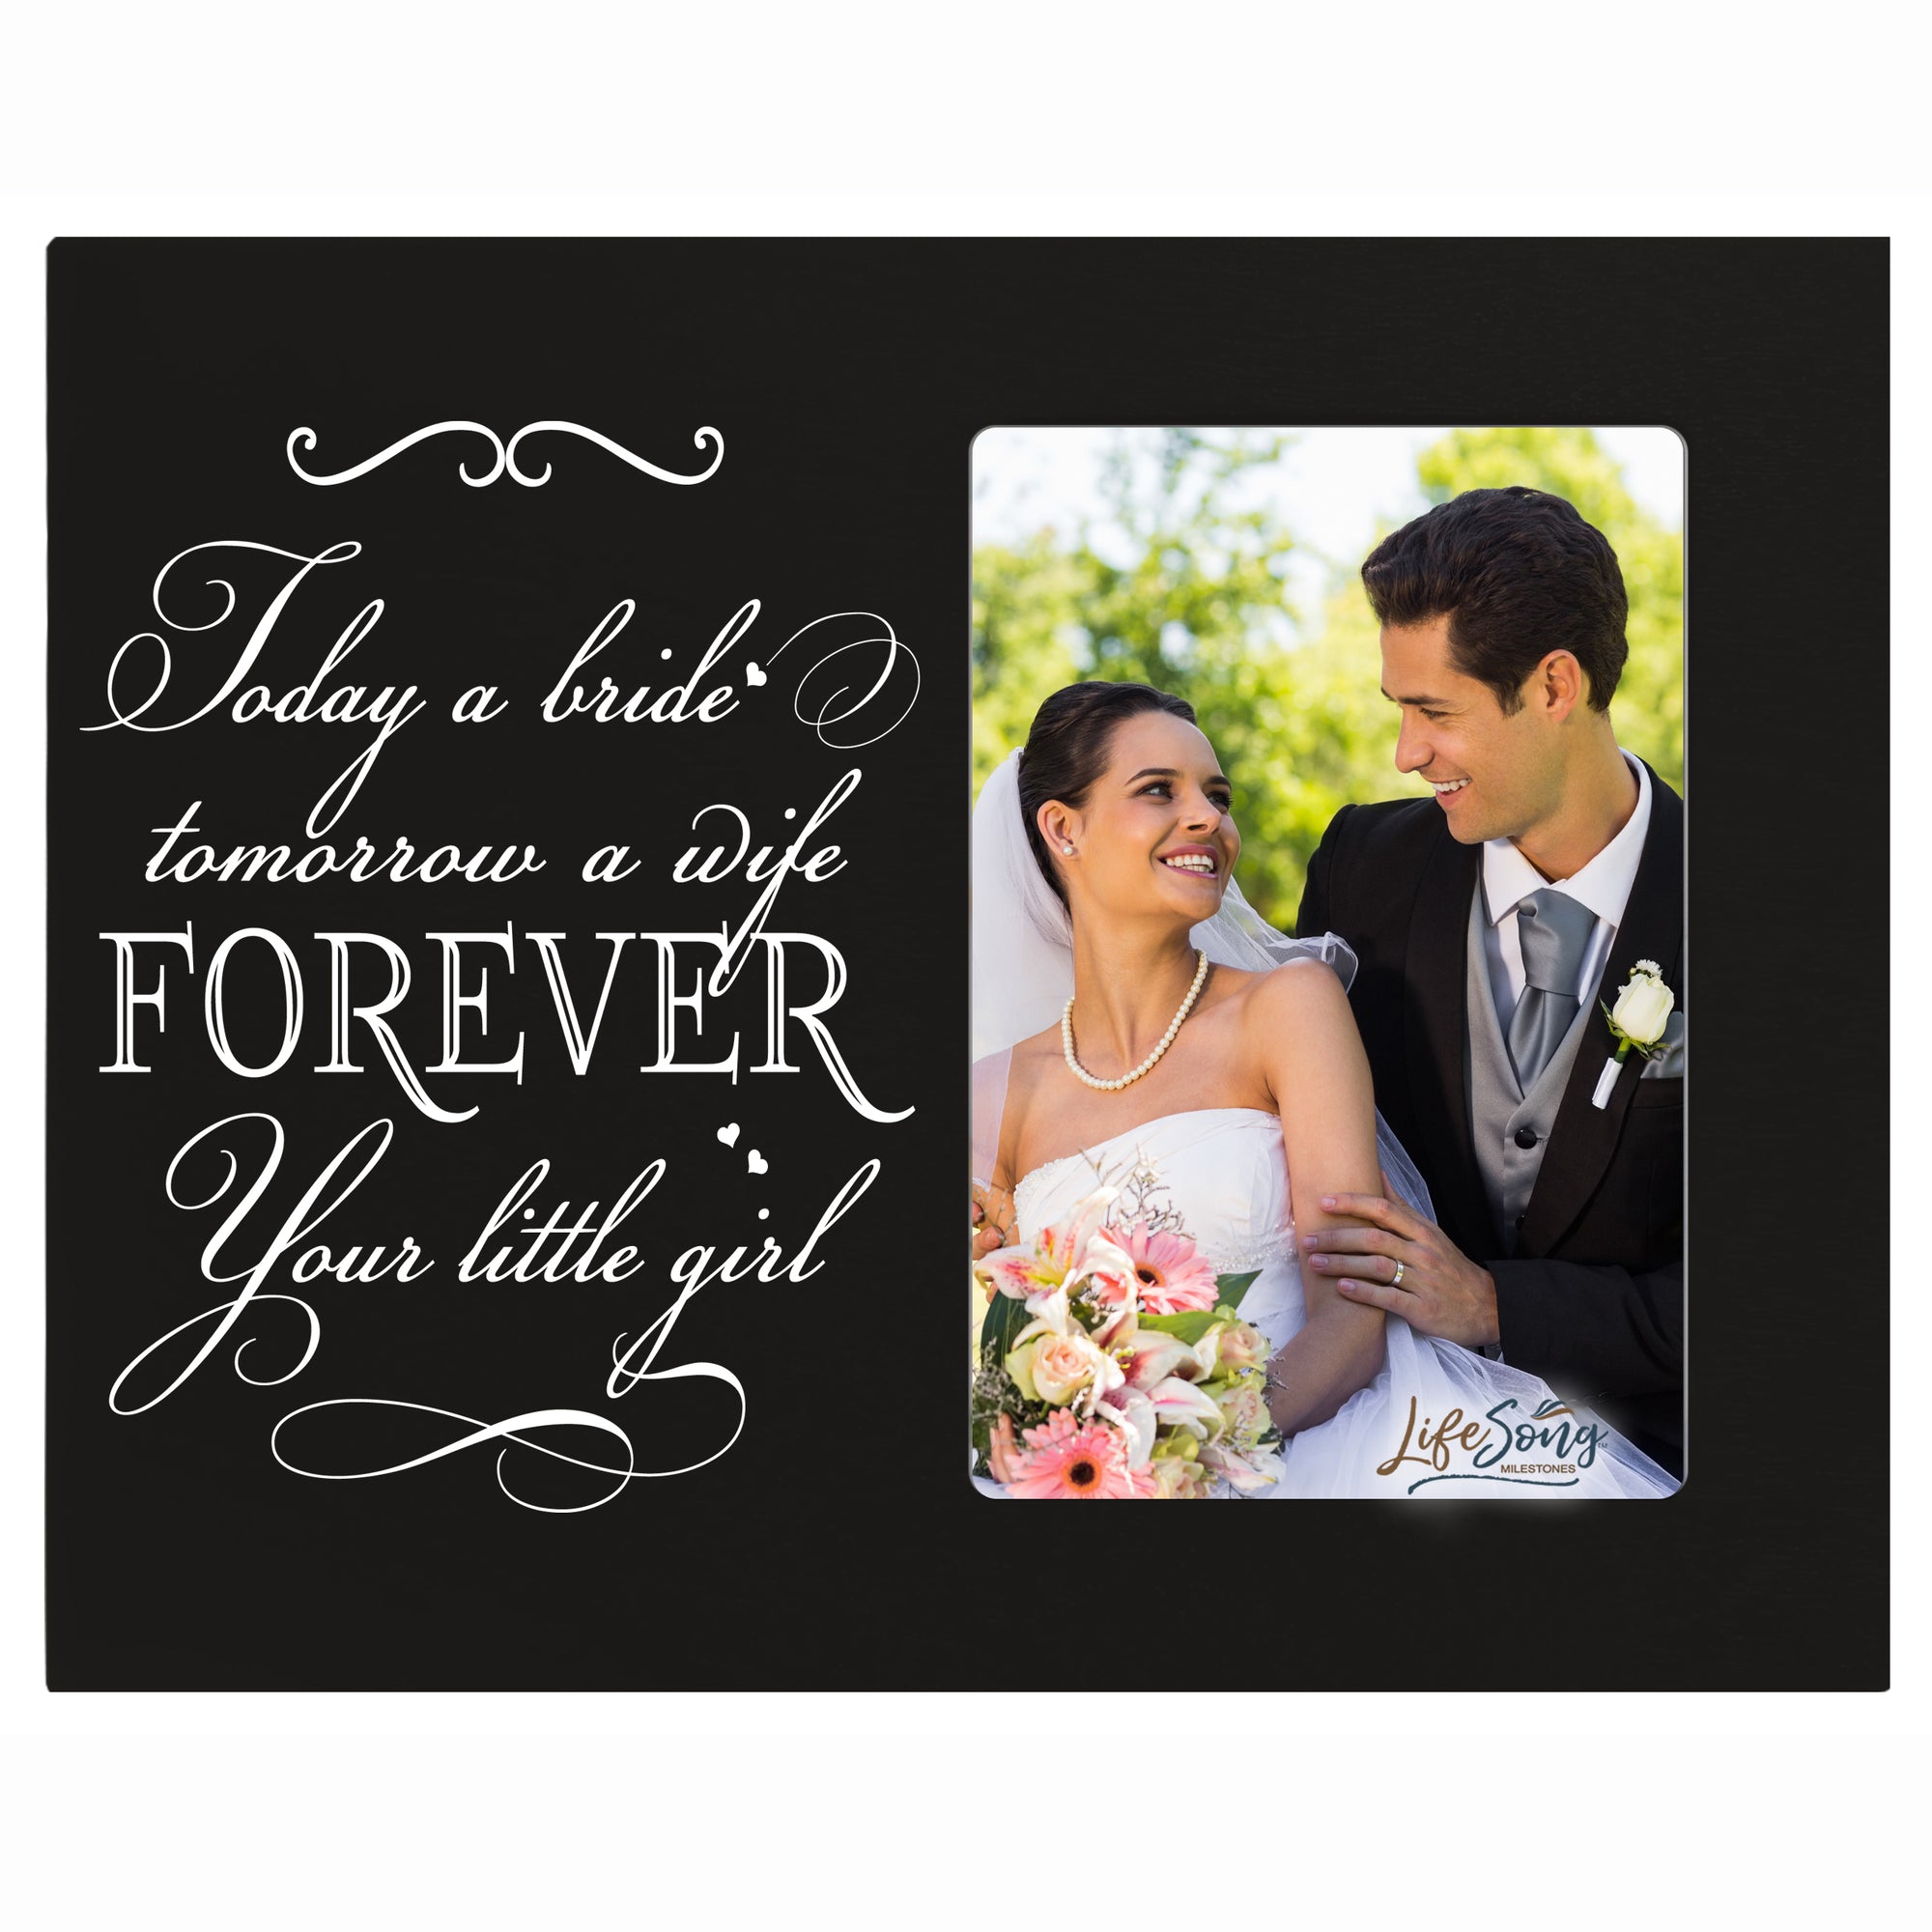 LifeSong Milestones 8x10 Picture Frame with Spanish Verse Made of Solid Wood for Wedding Anniversary or Engagement Gift for Couple Tabletop or Wall Mounting